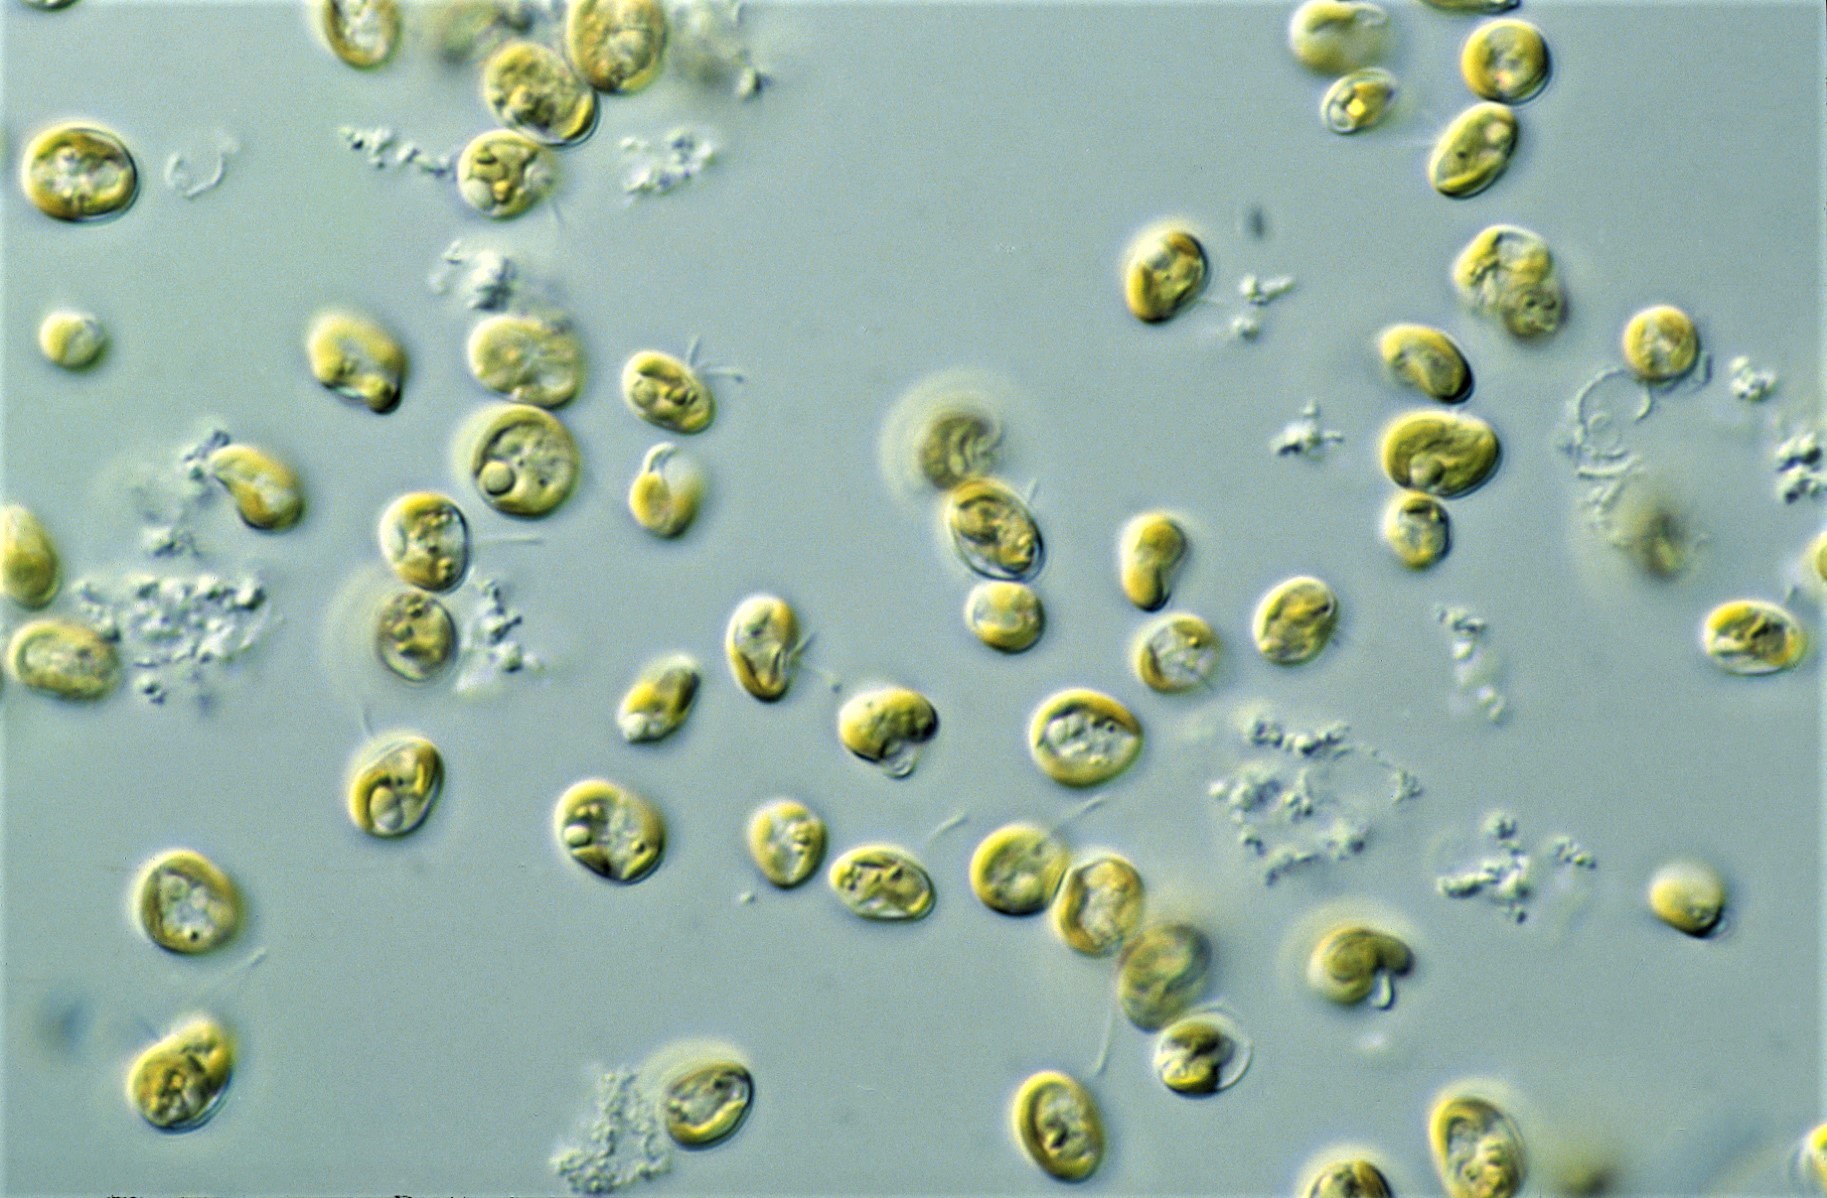 Production Of Microalgal Biomass Using Wastewater Reduces Antibiotic Resistance To Environment